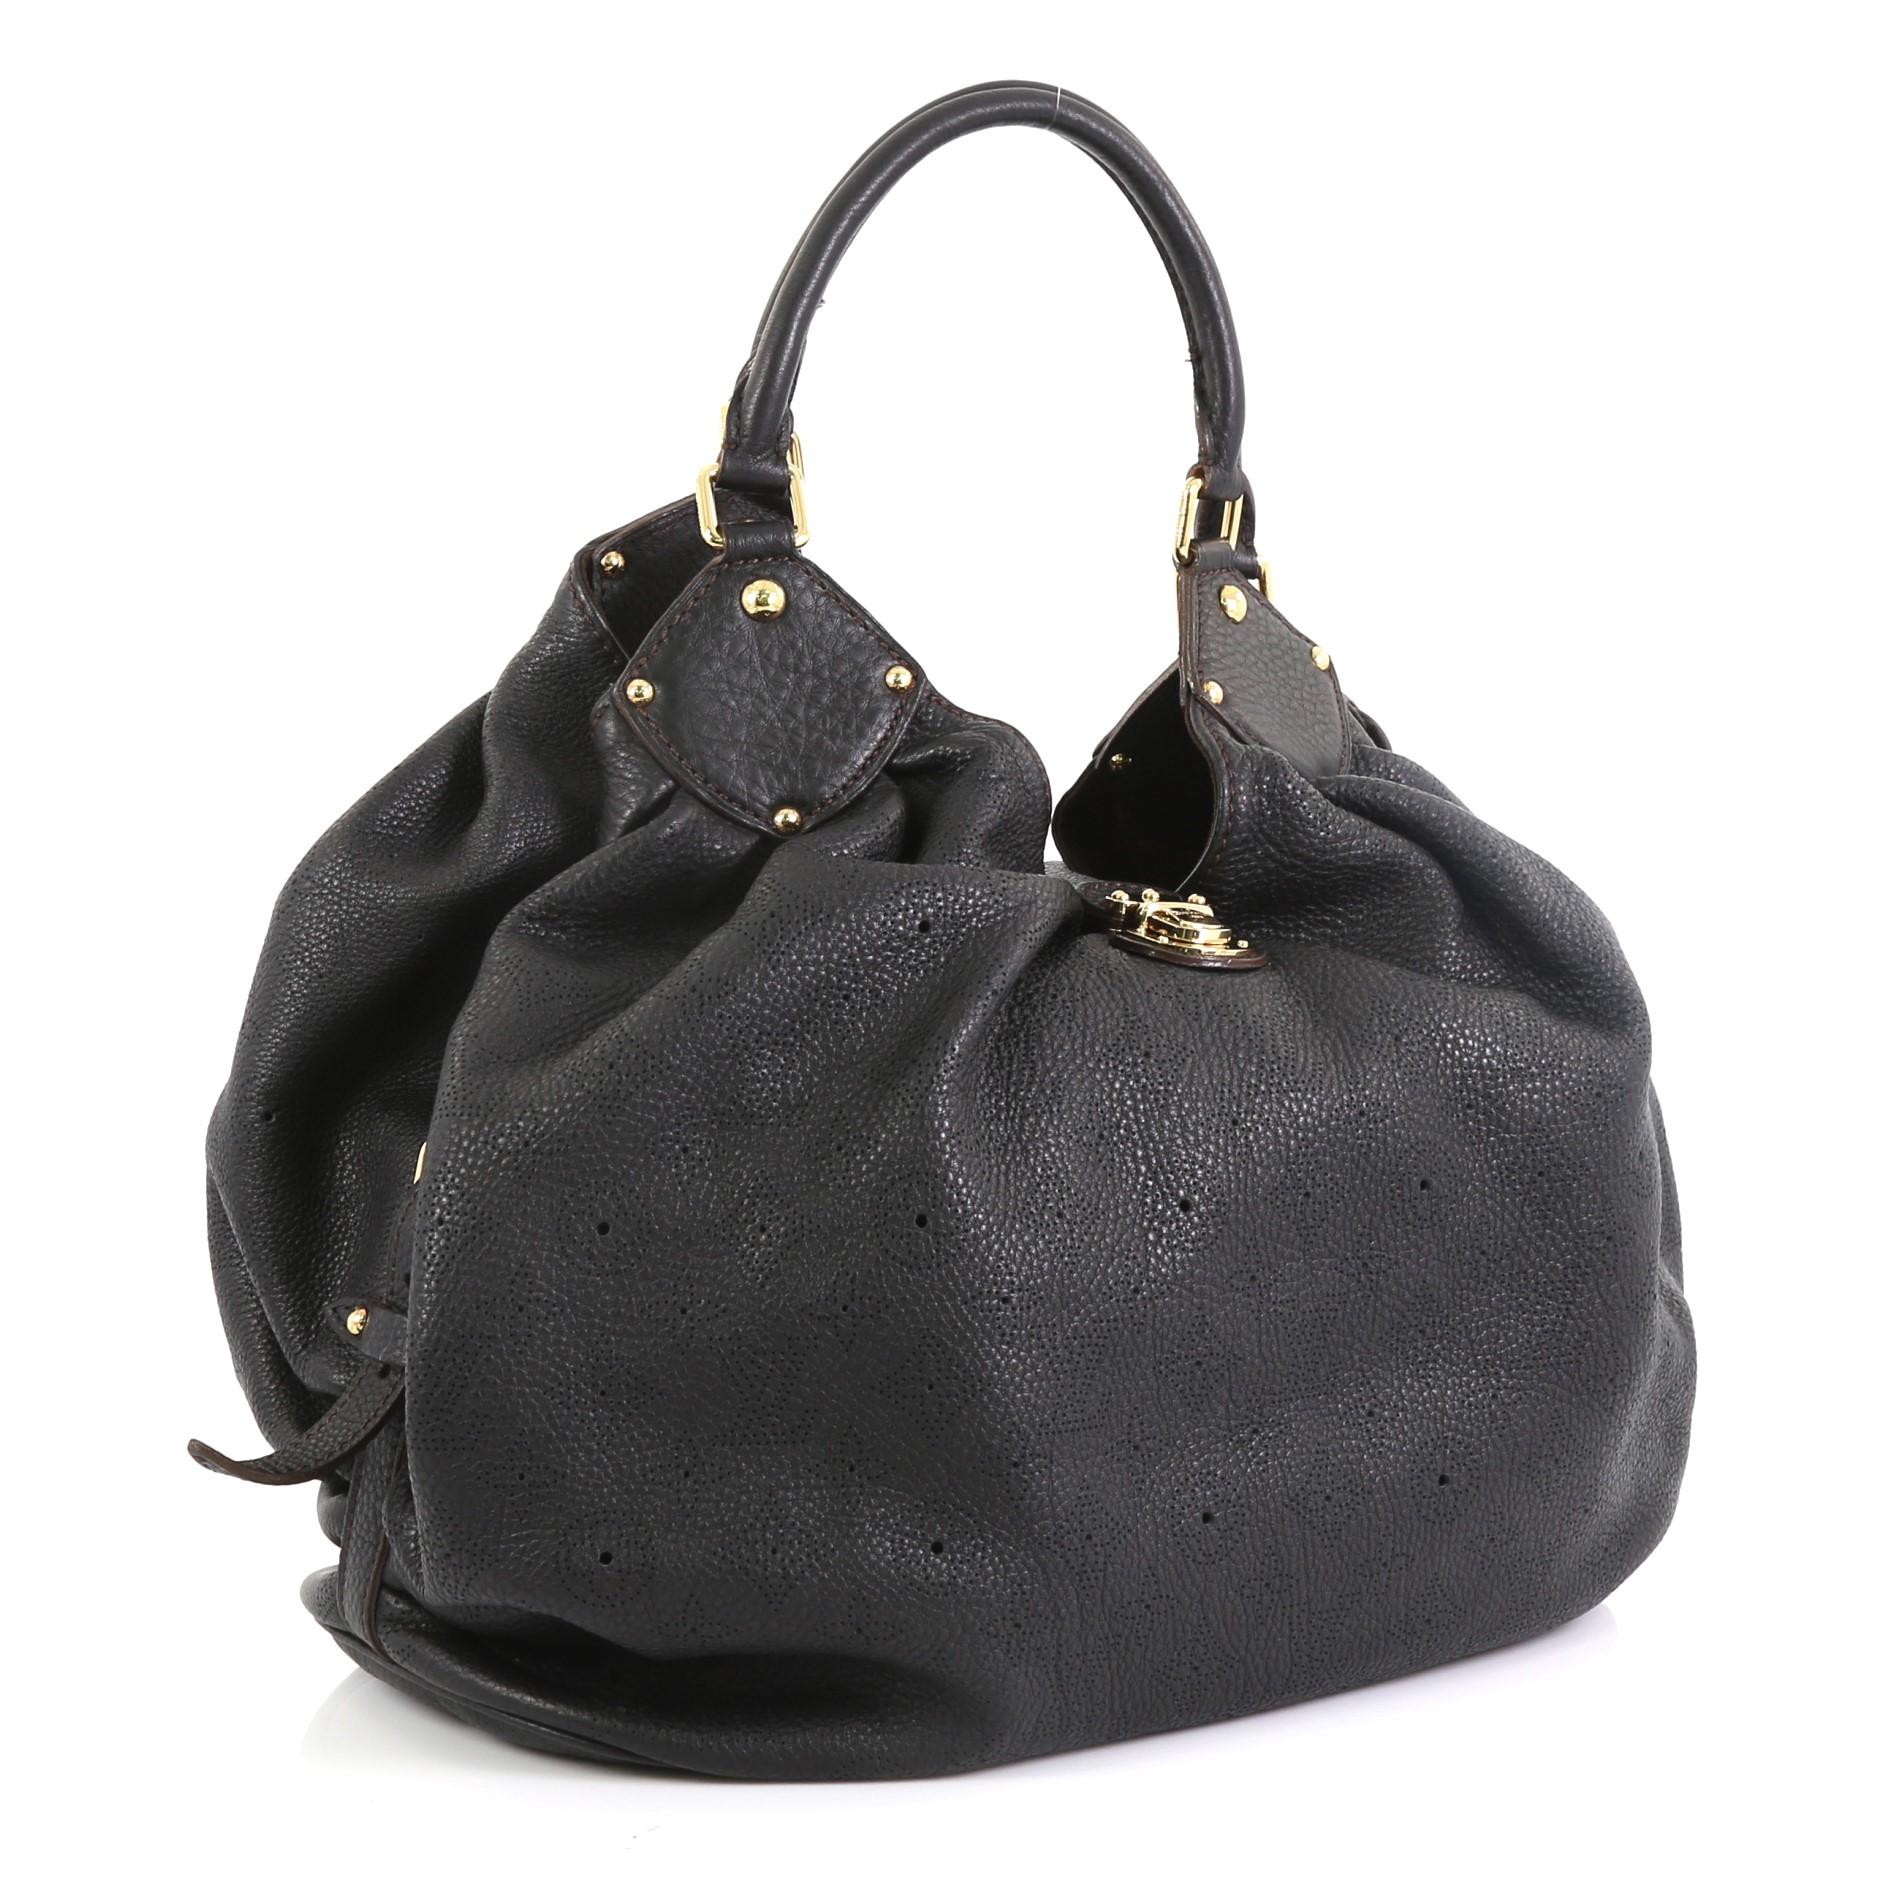 This Louis Vuitton L Hobo Mahina Leather, crafted from black monogram perforated mahina leather, features dual rolled handles, buckle and stud details, side belt straps, protective base studs, and gold-tone hardware. Its engraved top flap push-lock